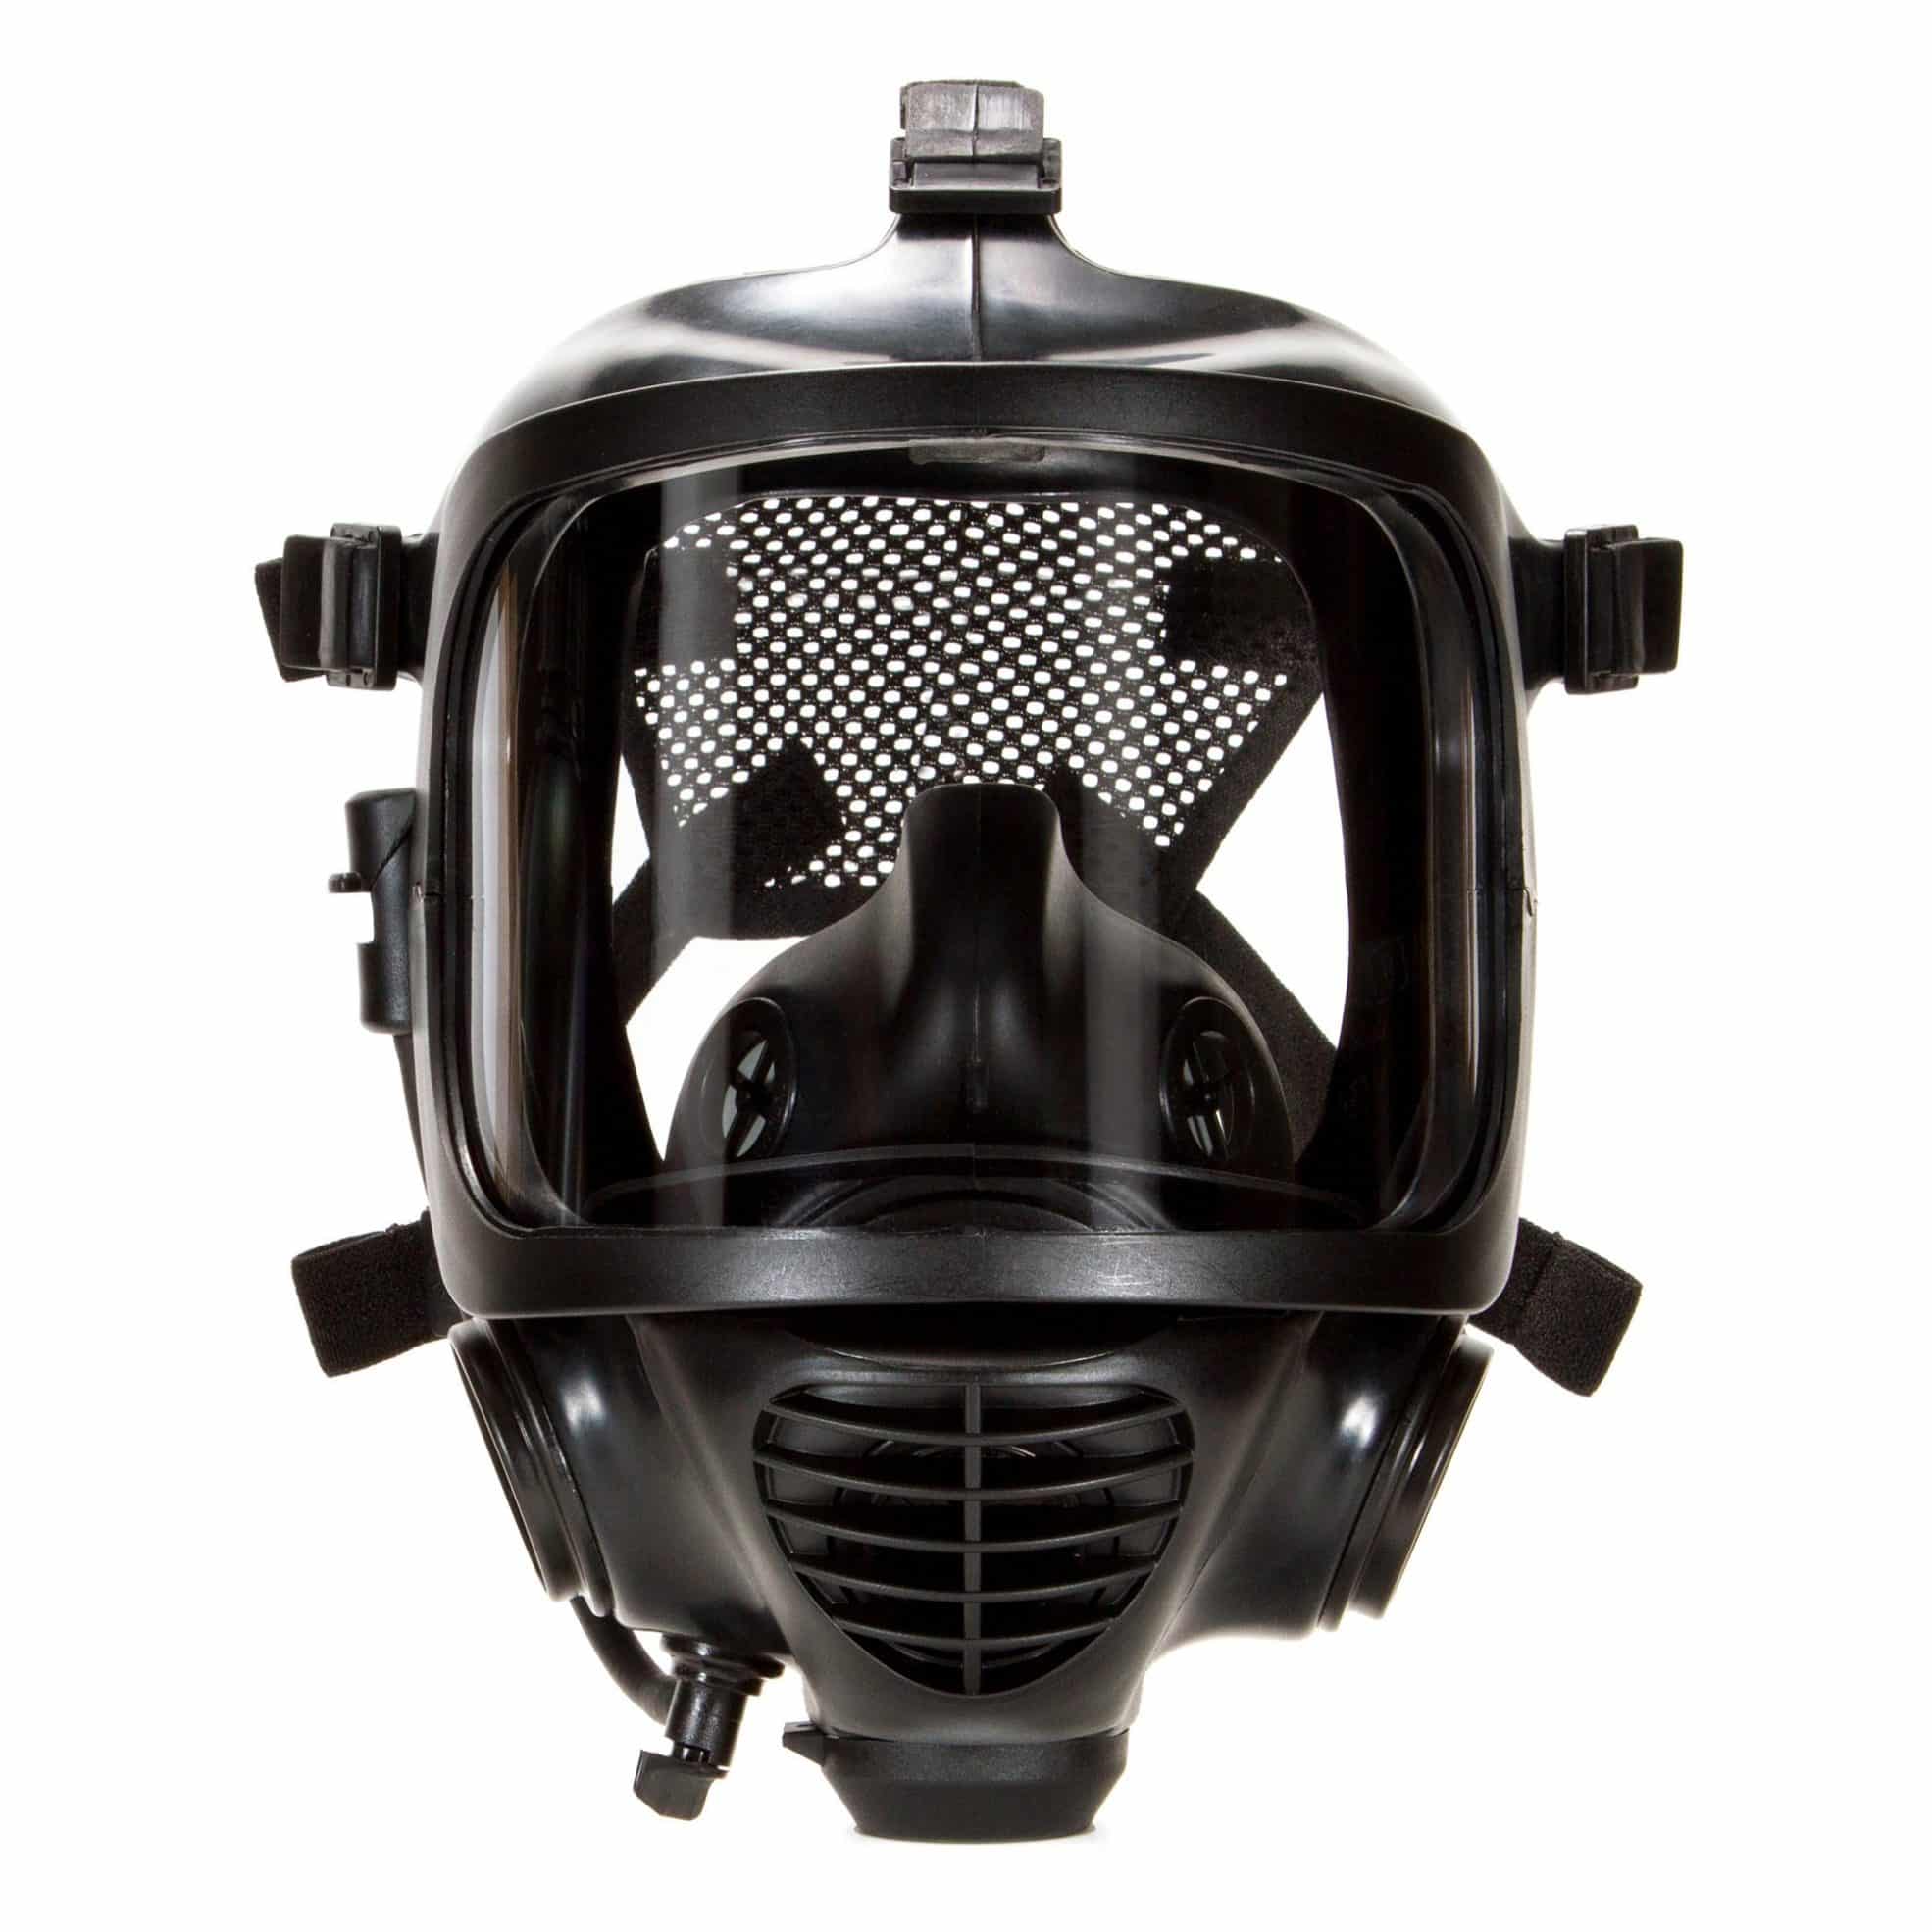 Military Gas Mask Full-Face - Protects Against CBRN Agents, Industrial Toxic Gases...